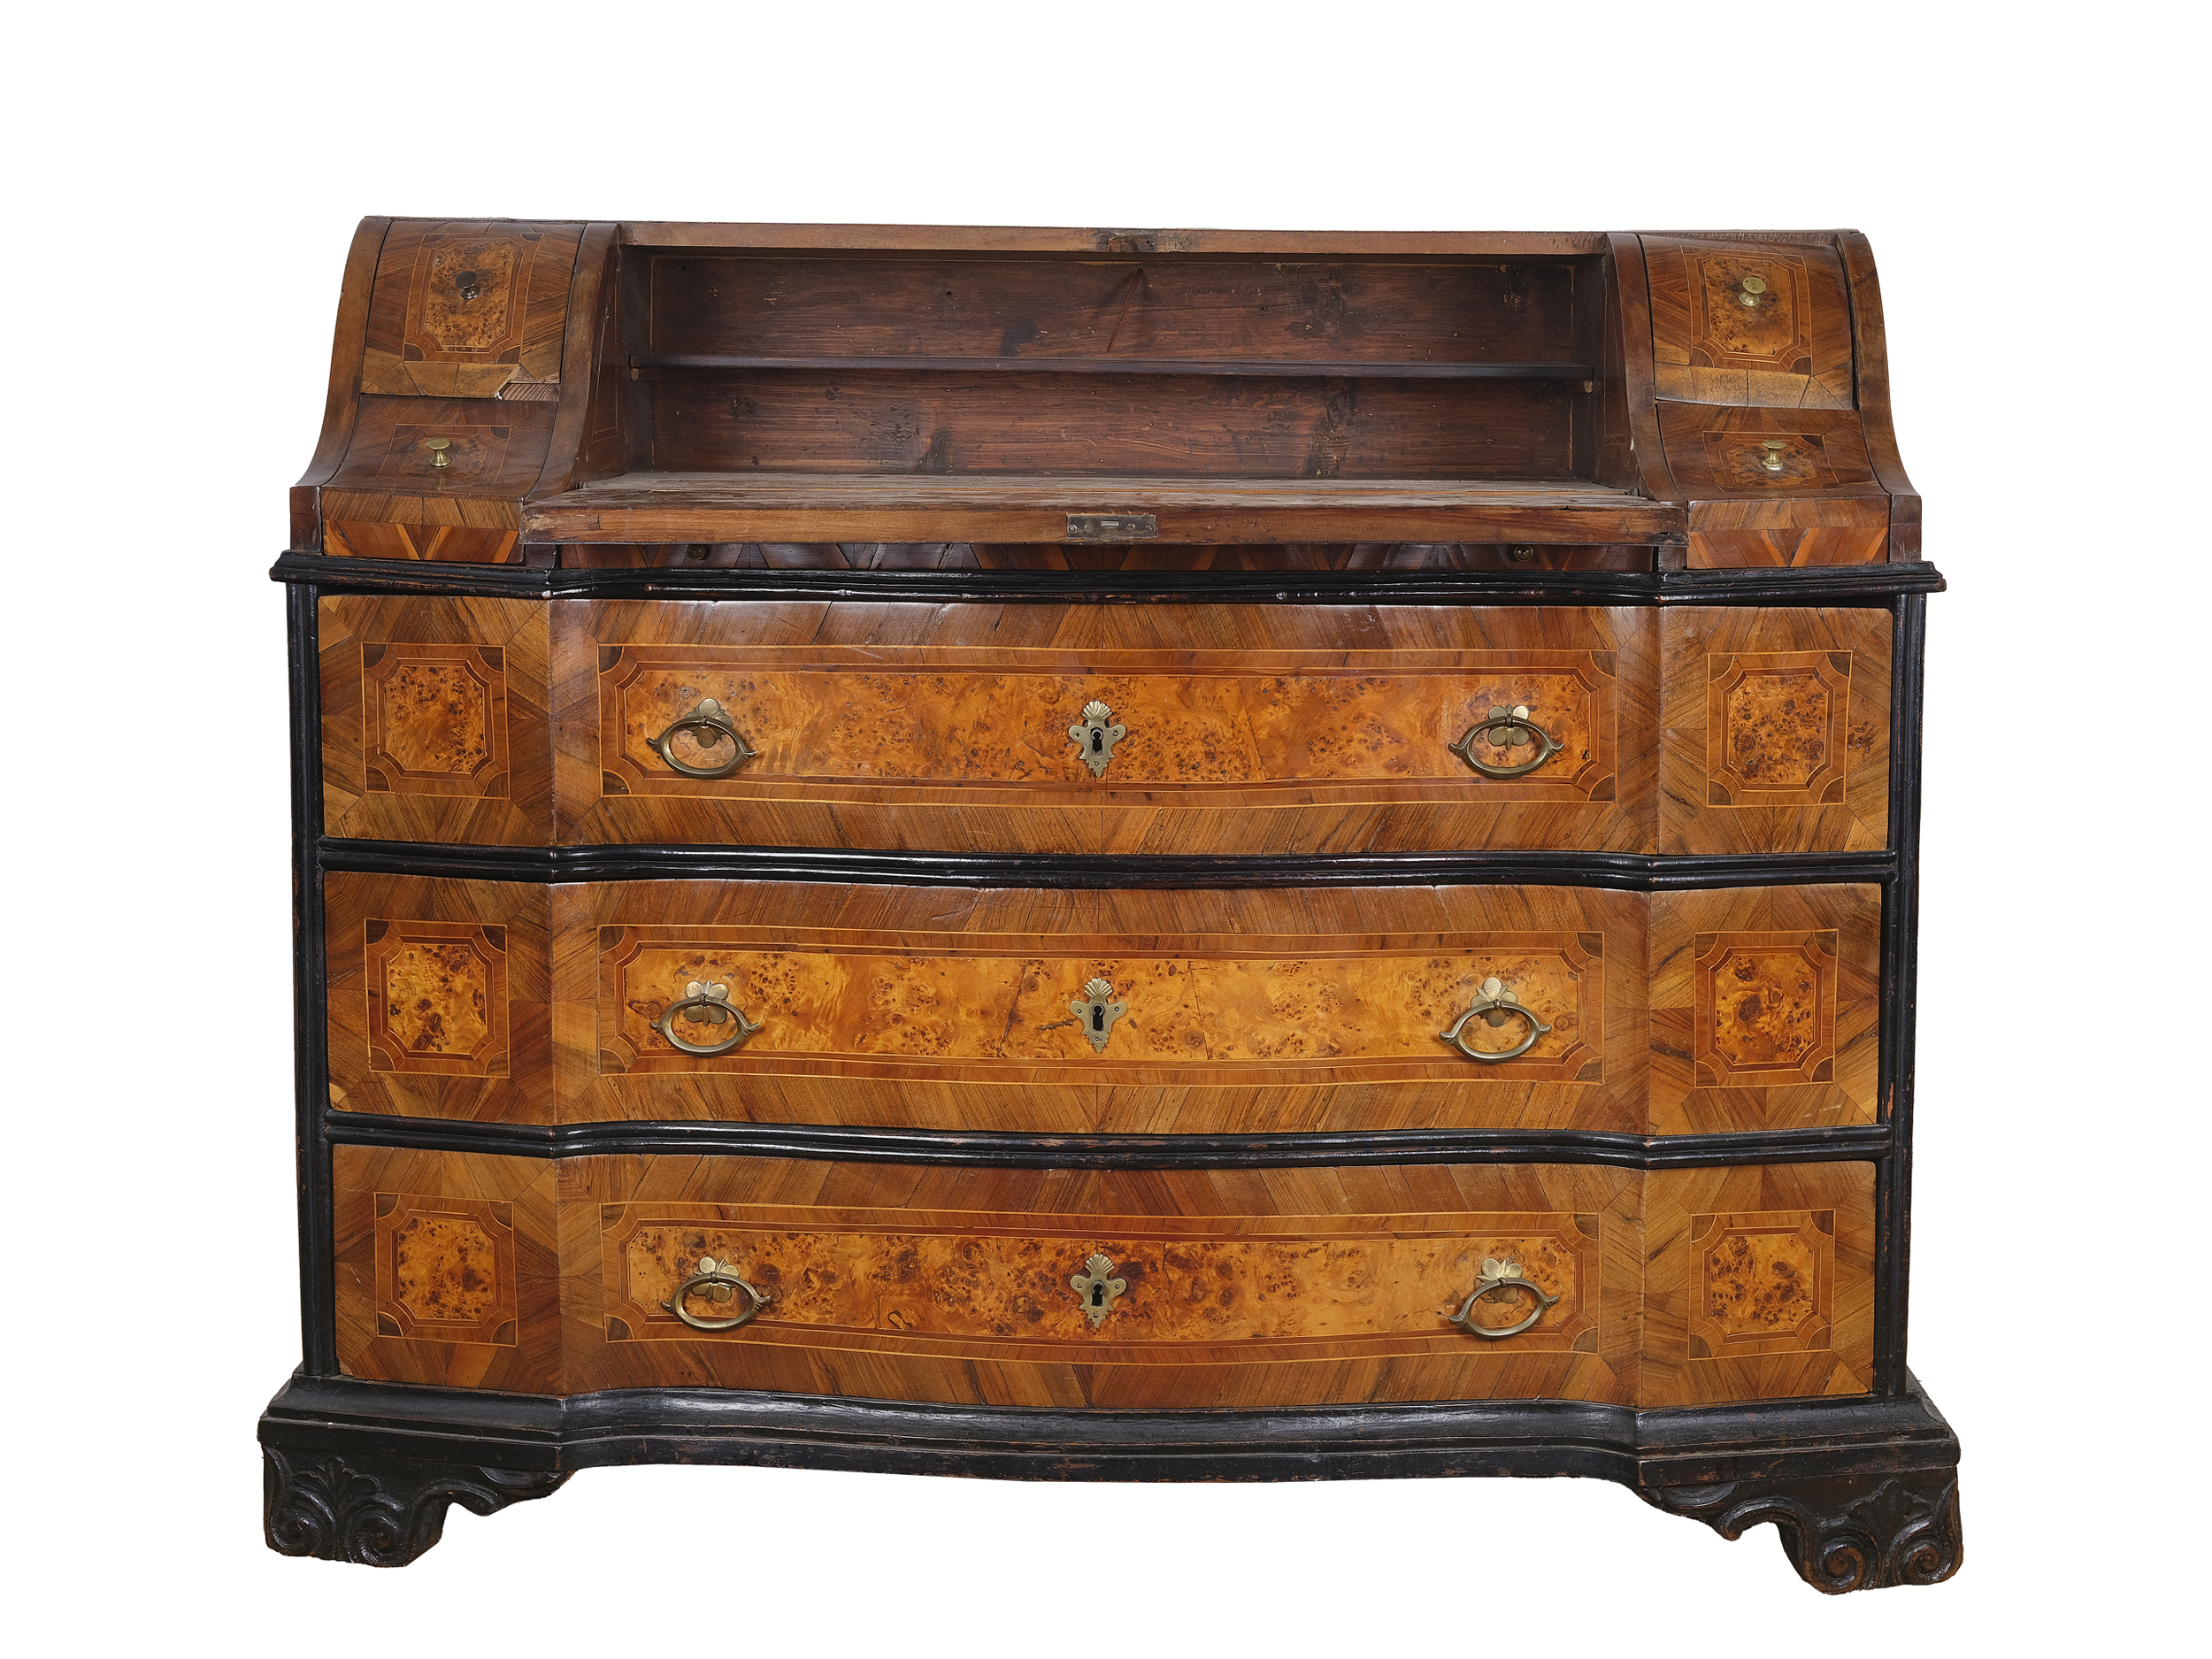 Writing chest, Italy, mid 18th century - Image 4 of 7